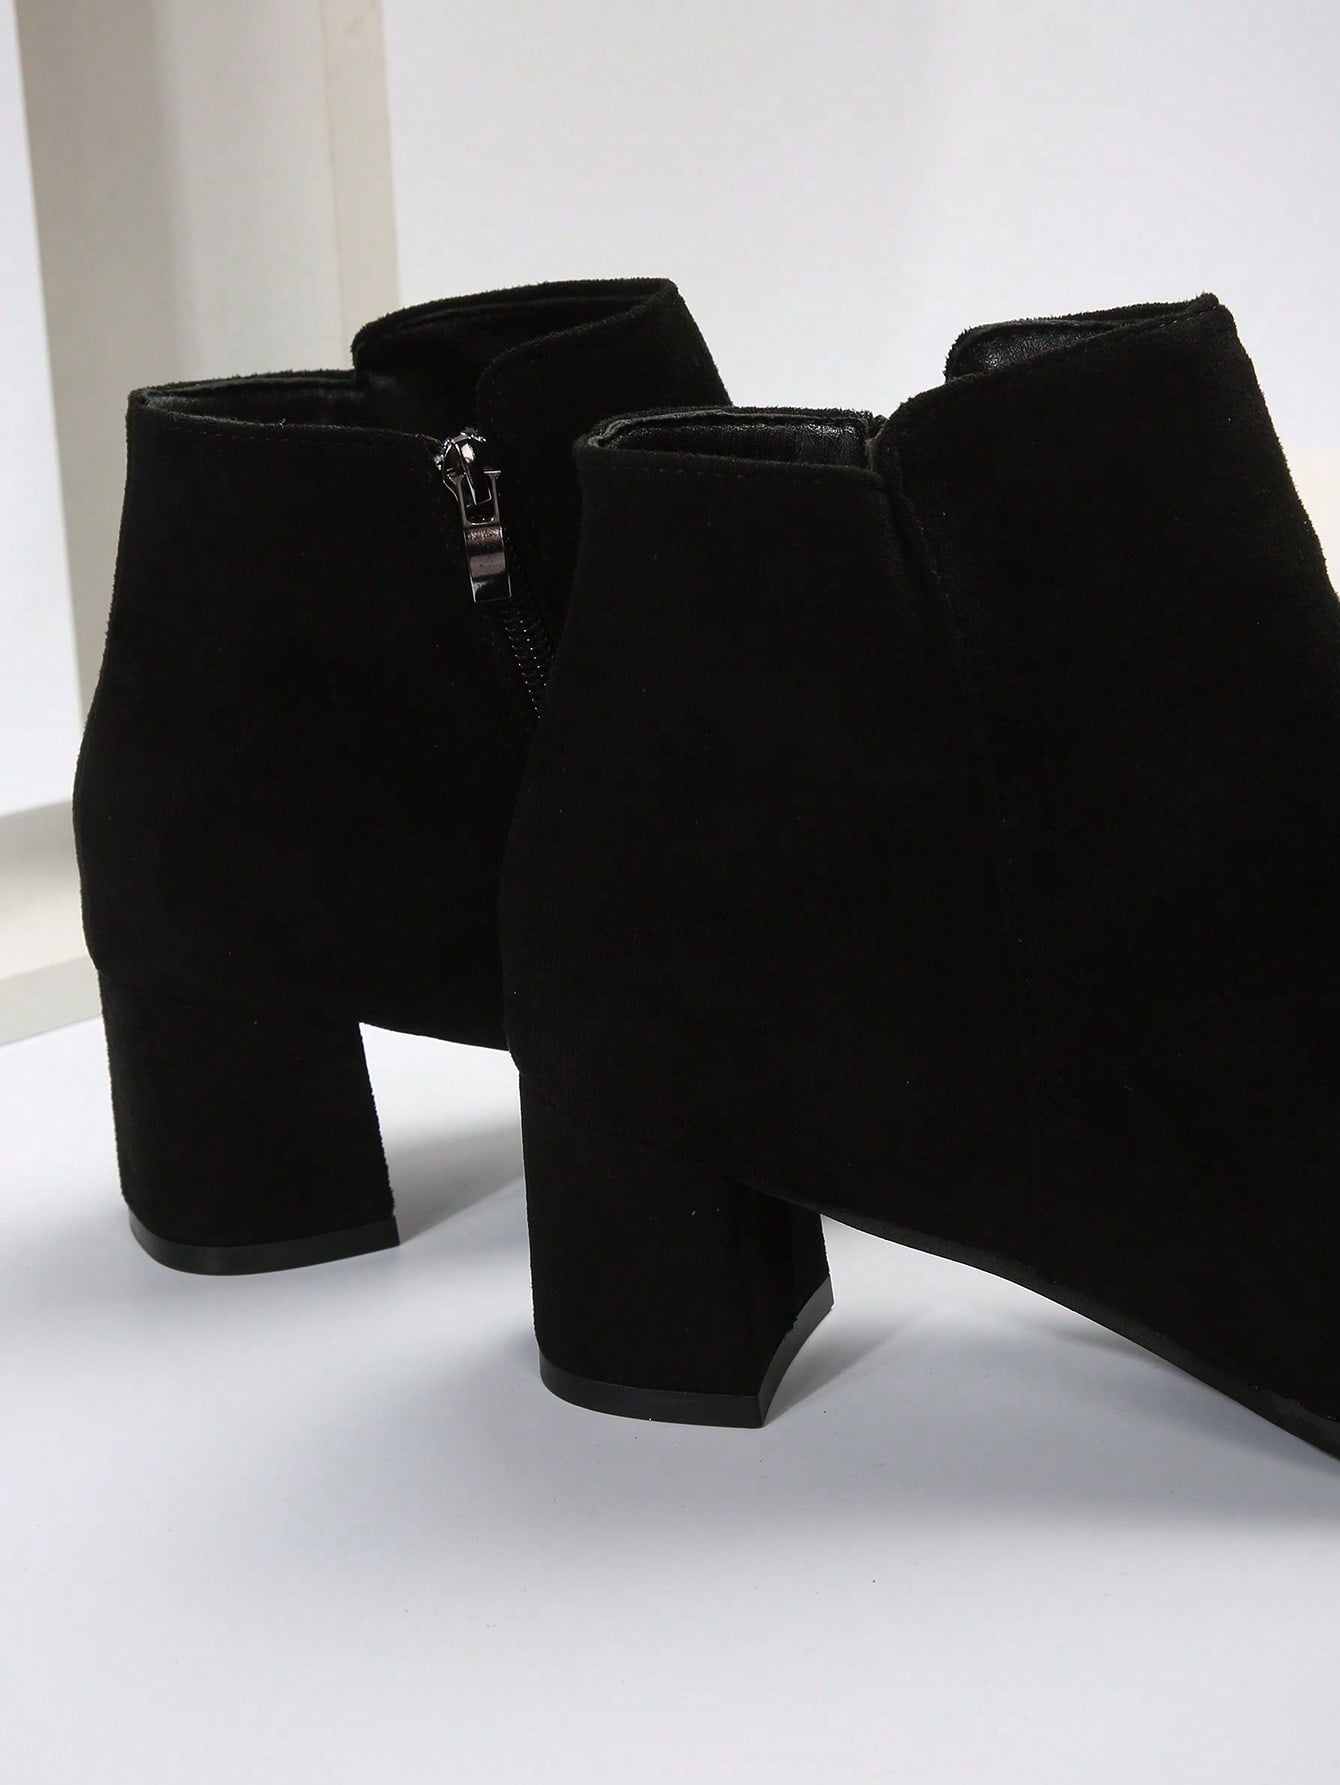 Fashionable Boots For Women-Black-2